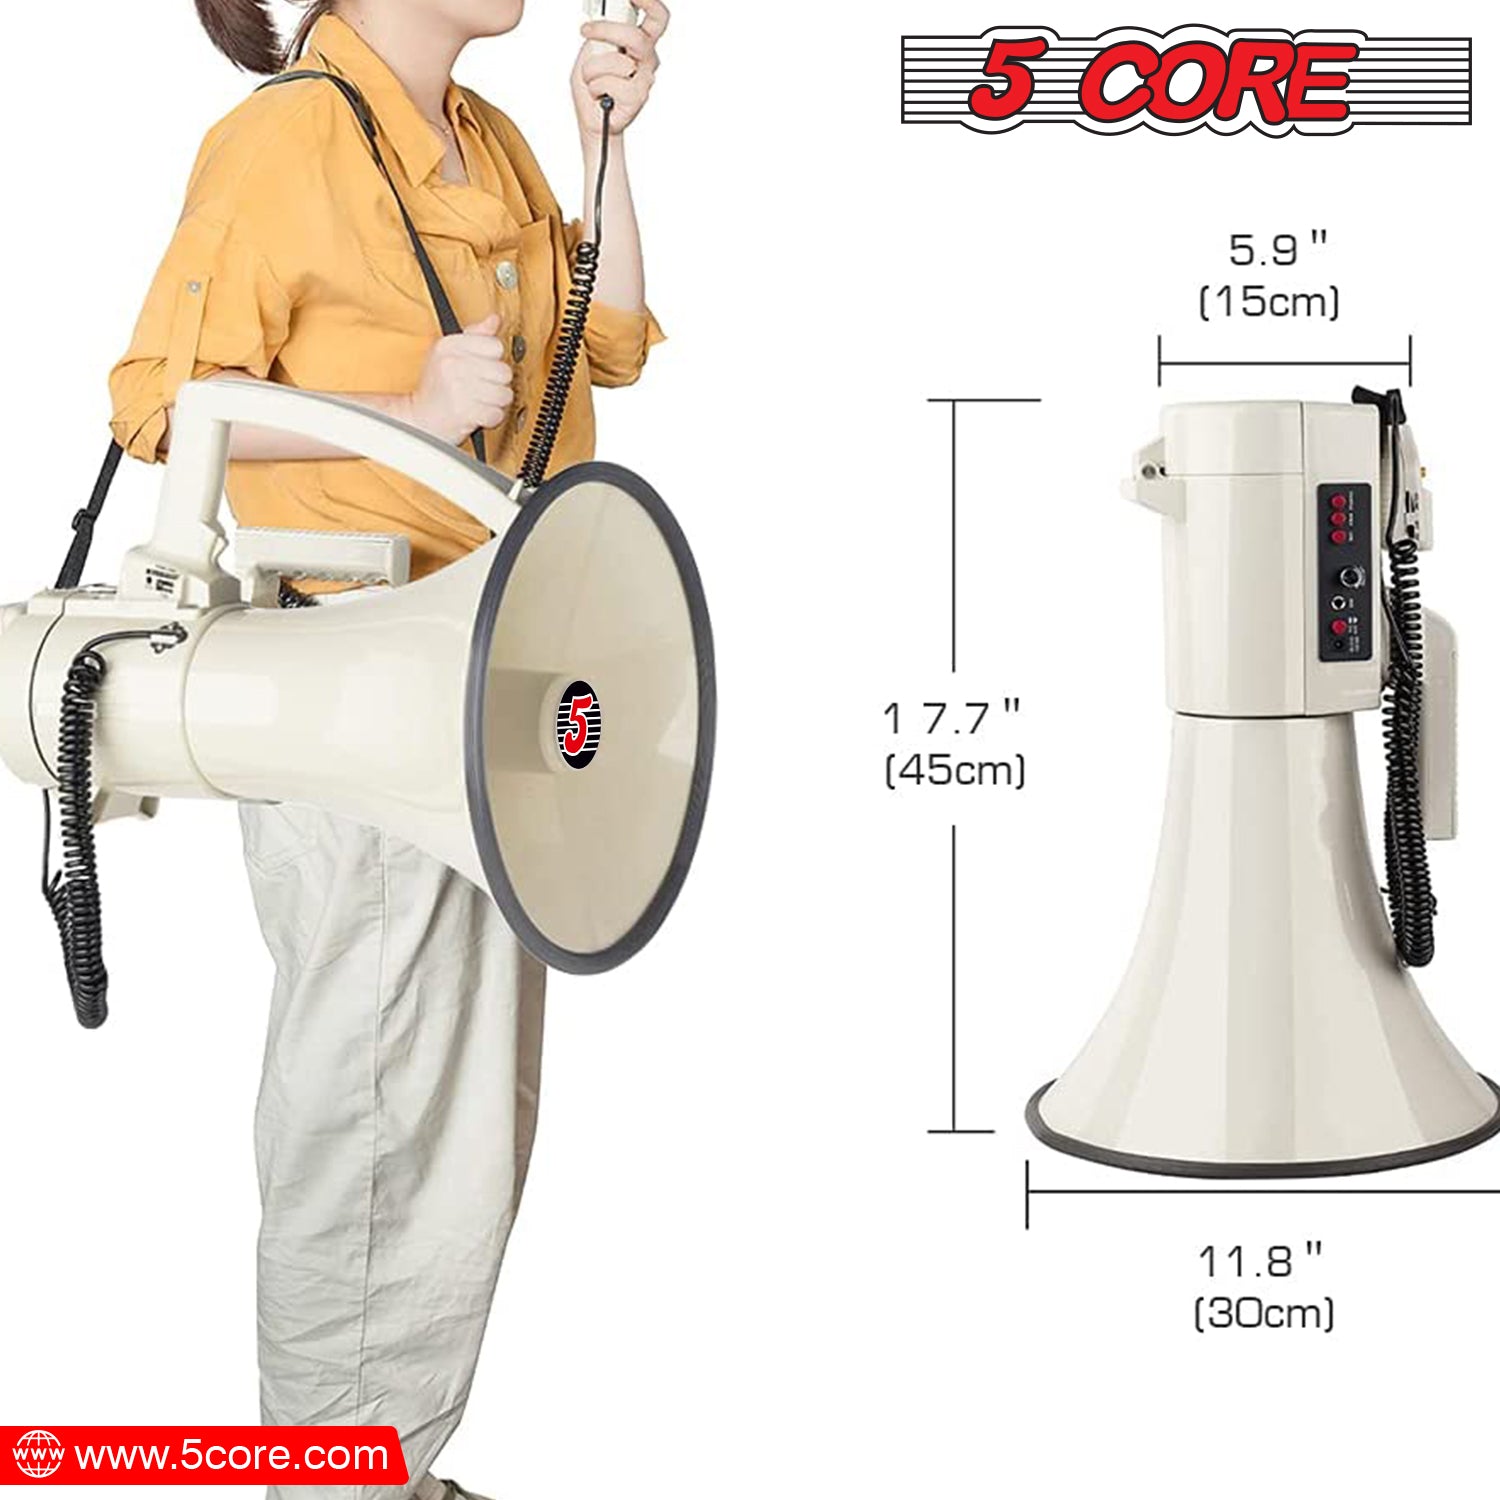 Extended Range Capability - 5 Core Megaphone Projects Sound up to 2000 Yards